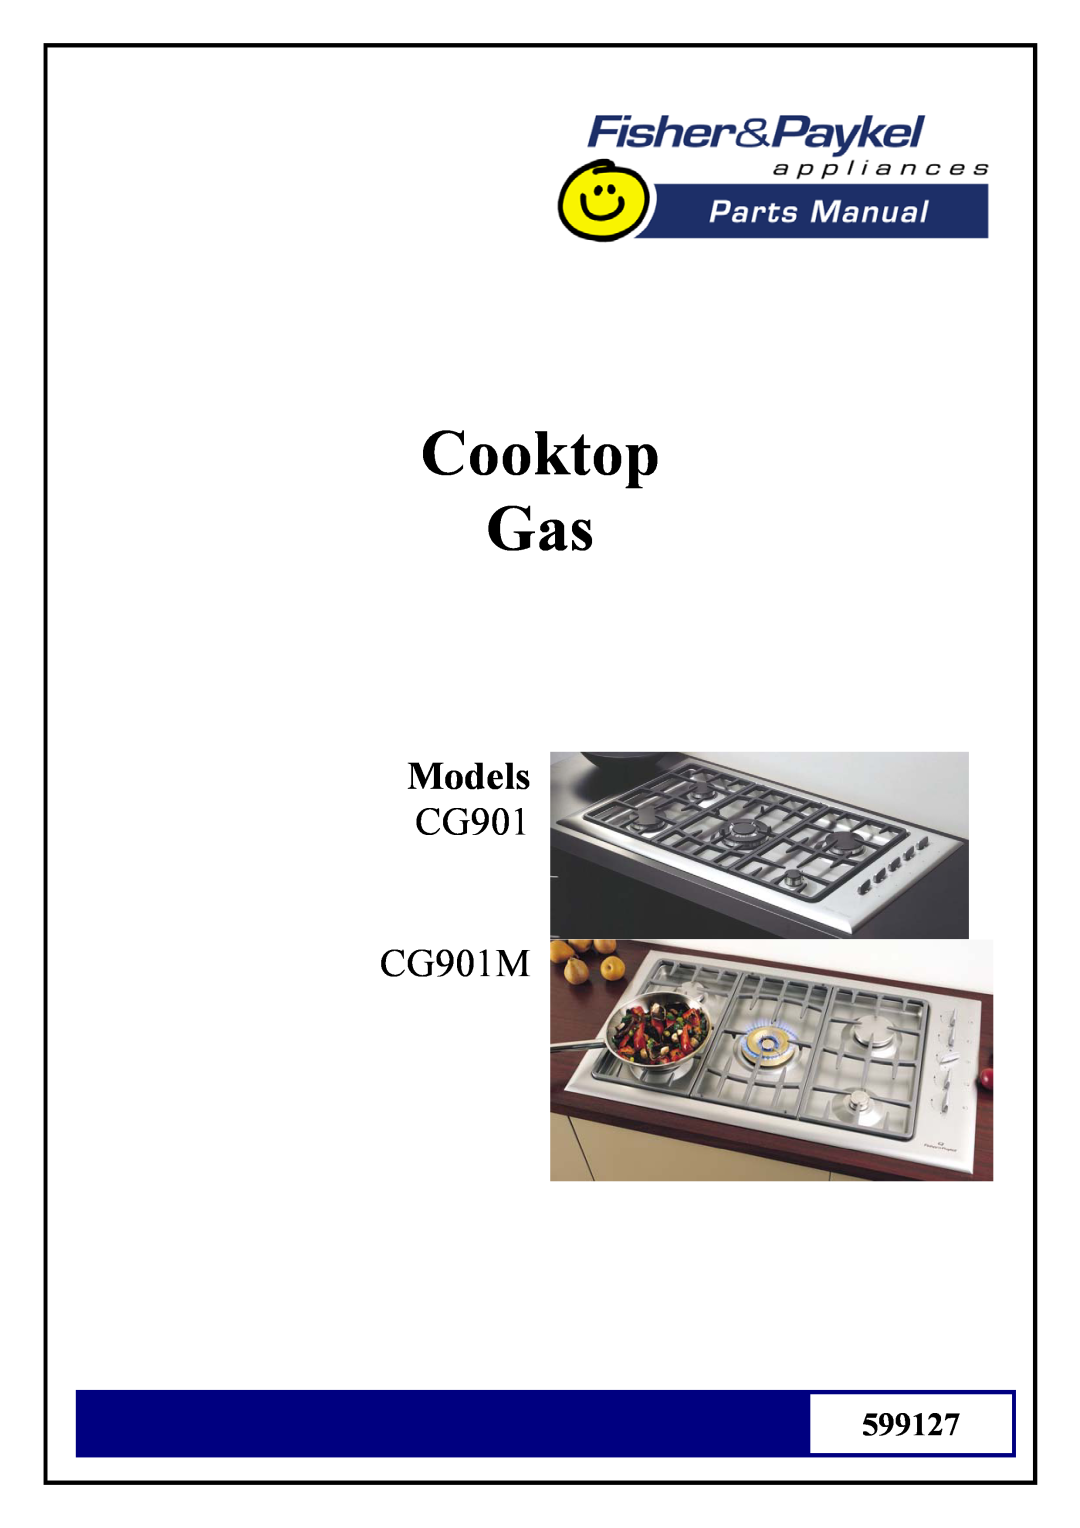 Fisher & Paykel 599127 manual Cooktop Gas, Models, CG901 CG901M 